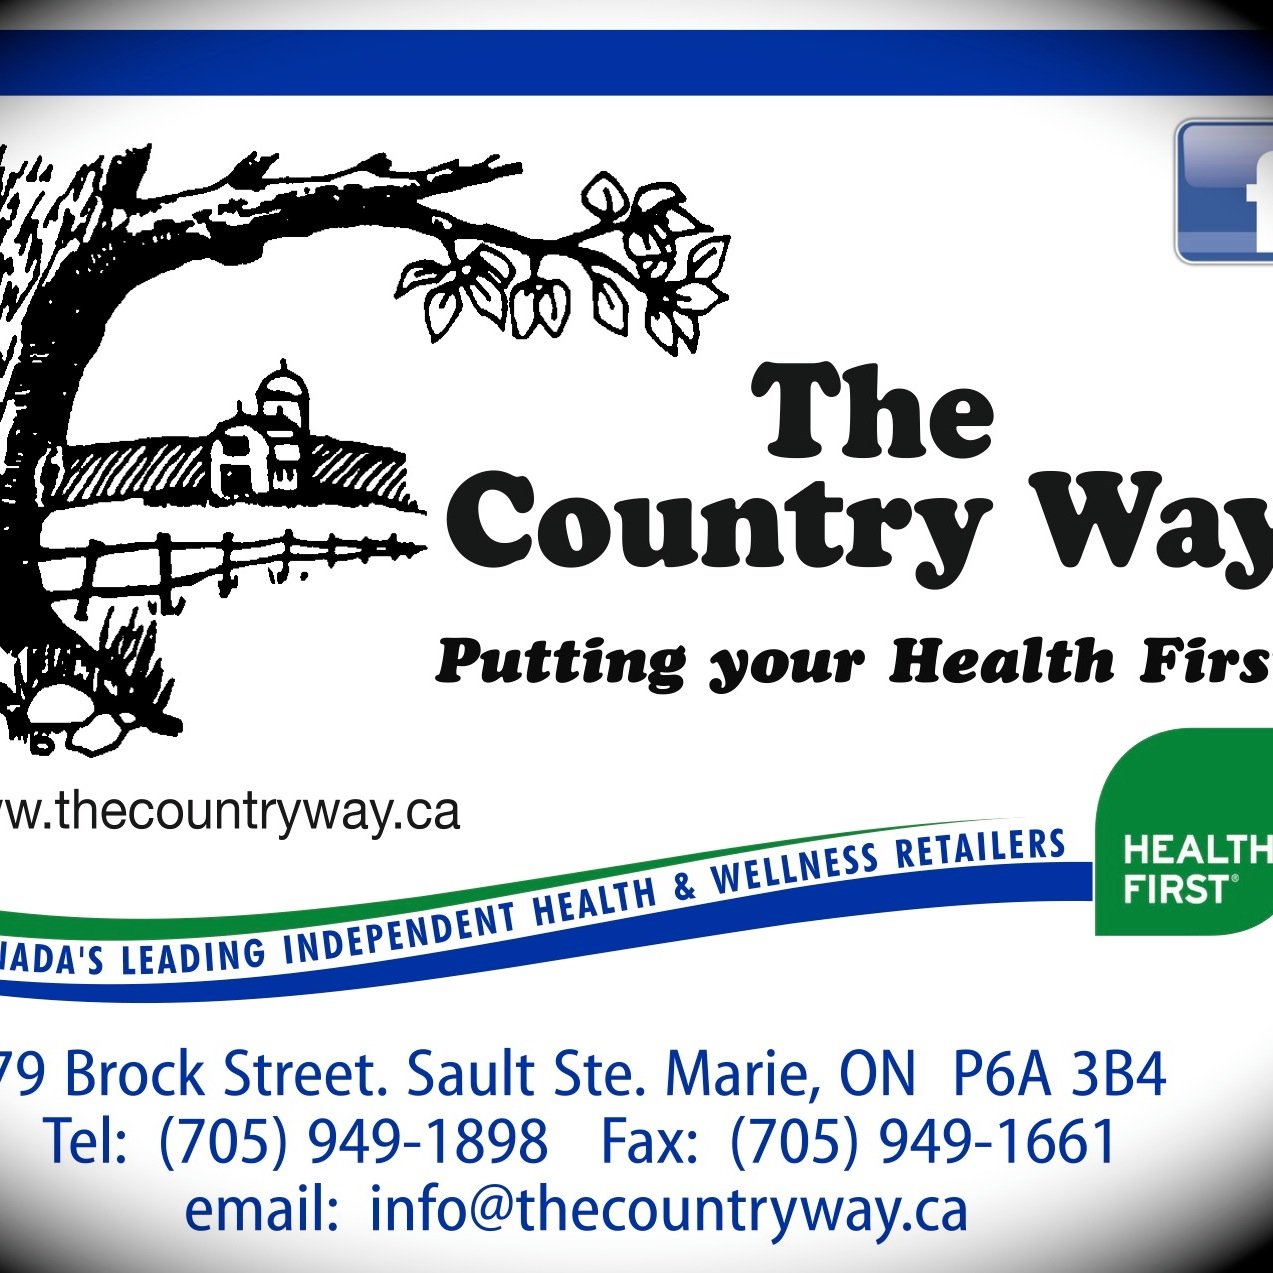 The Country Way is a premium, full service health food store serving the community for over 40 yrs. Carrying ORGANIC & NON-GMO'S and providing Certified Staff.